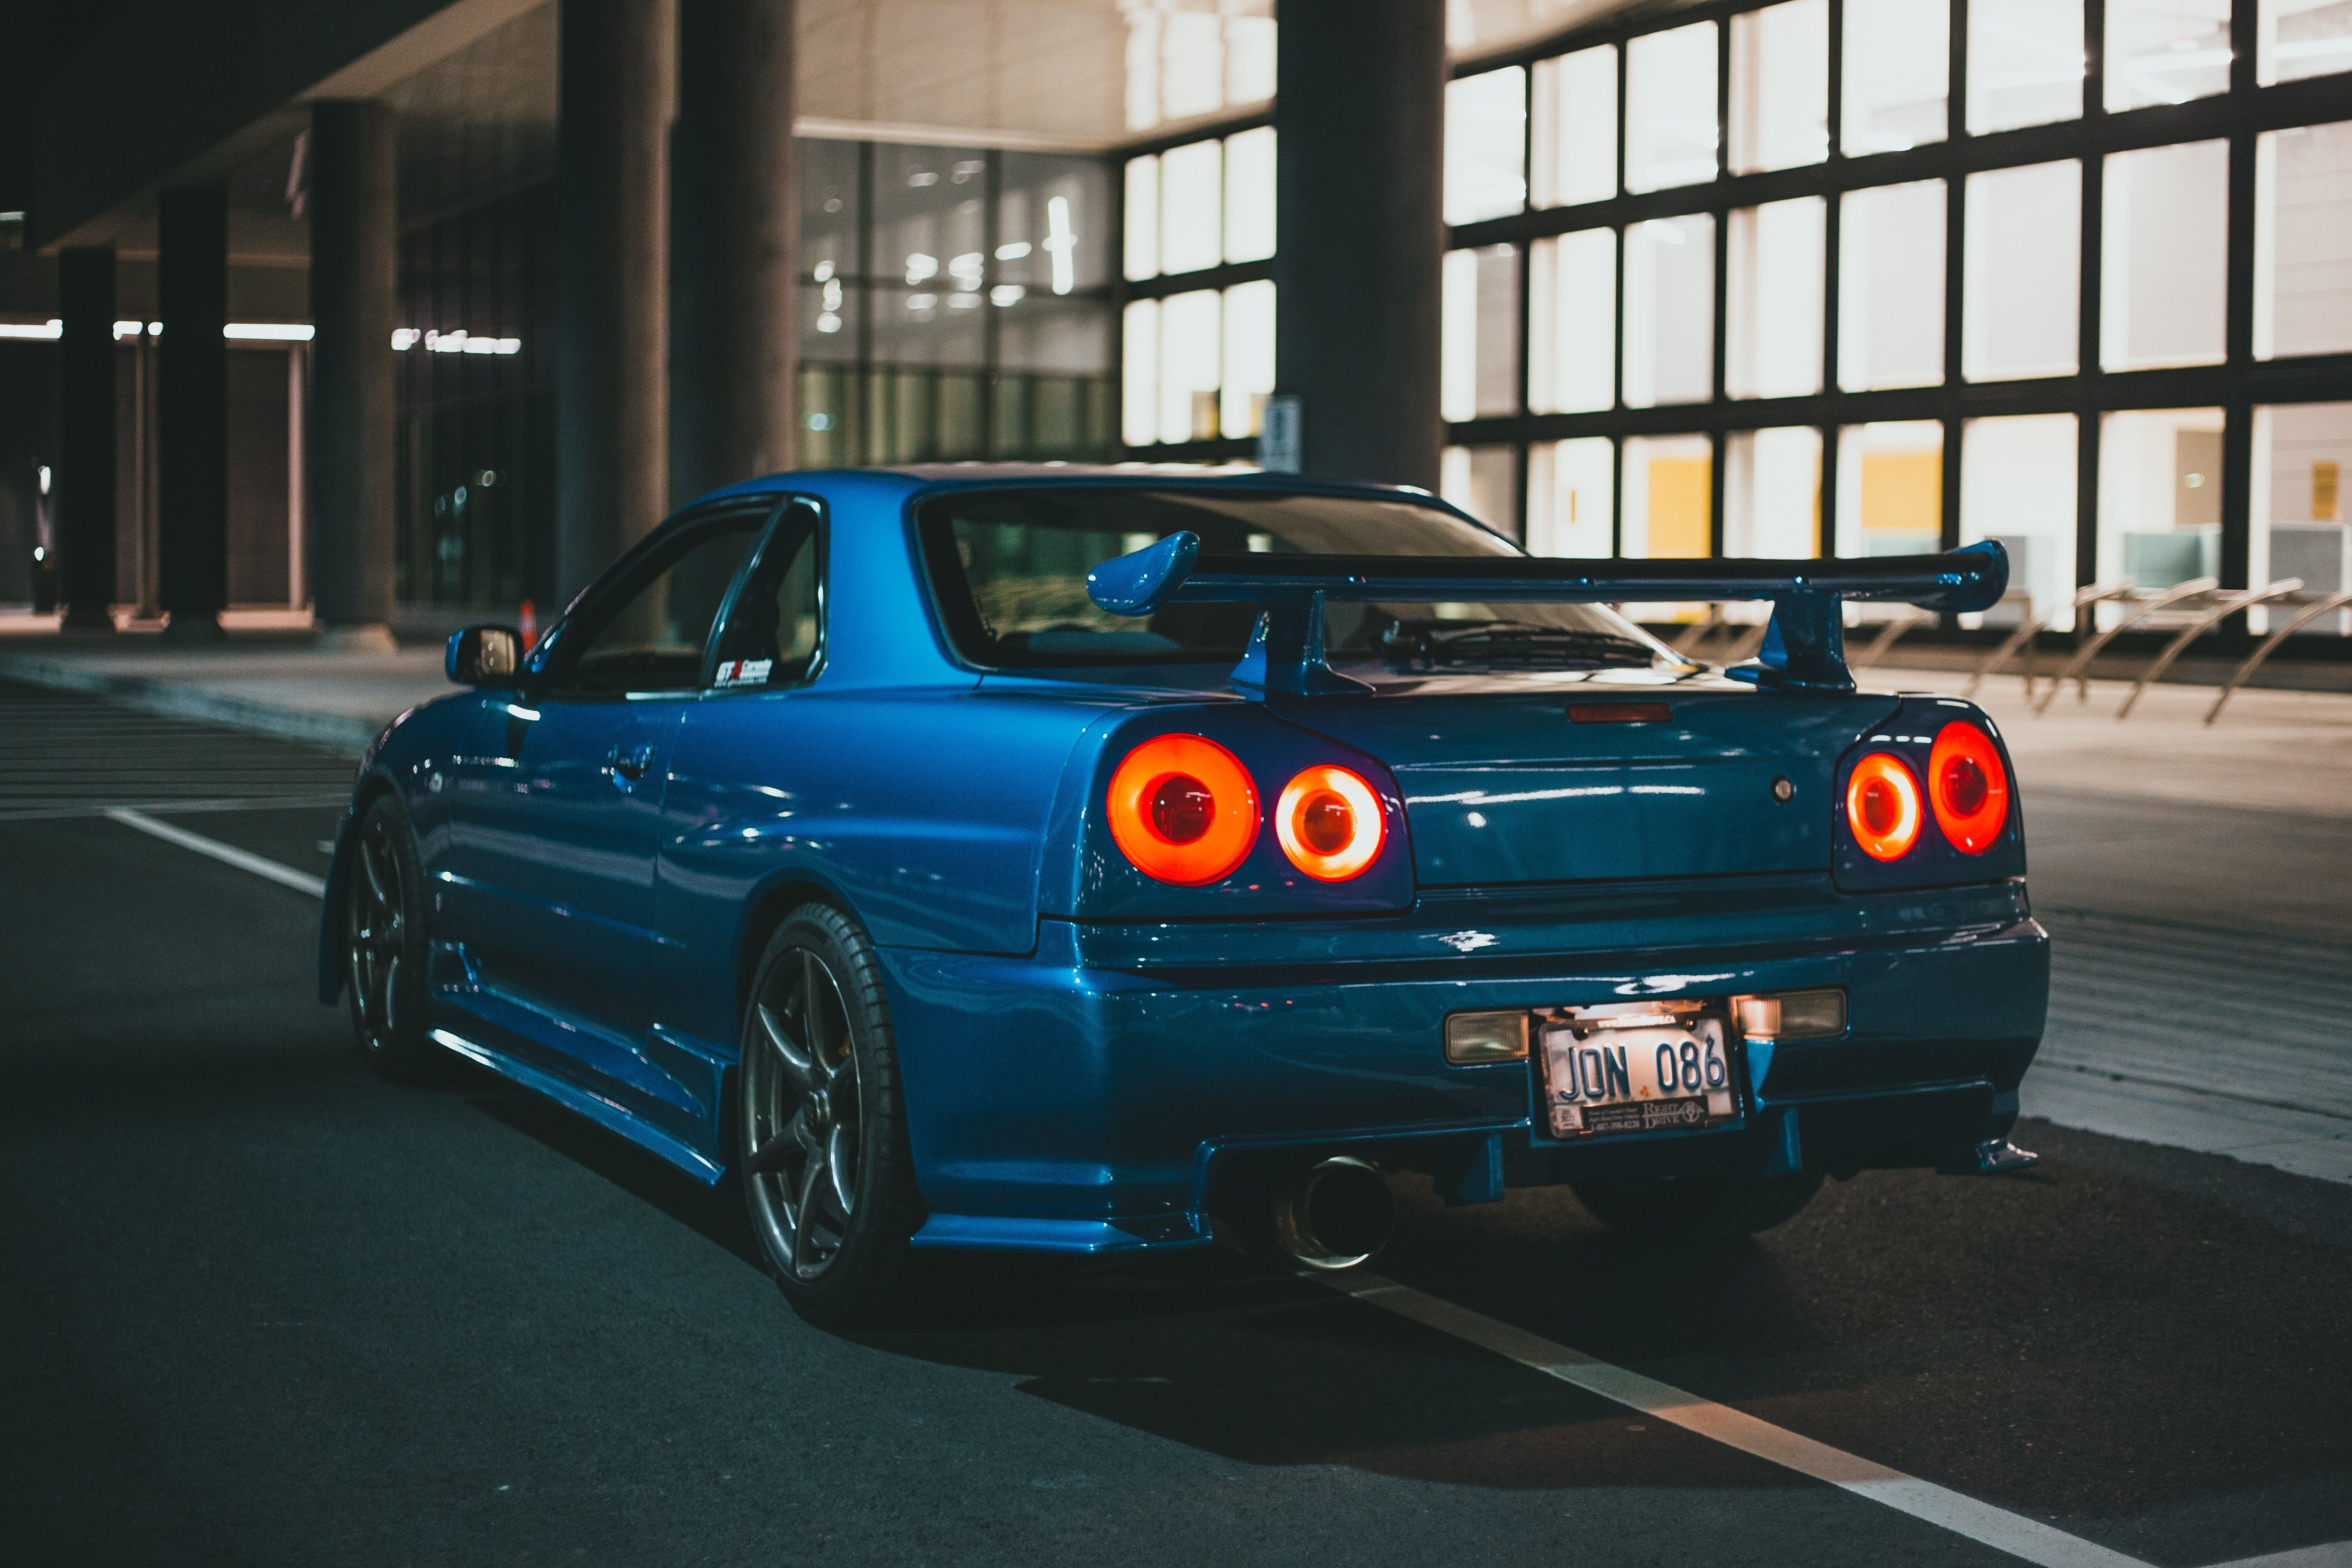 A blue car parked in the middle of an empty parking lot - Nissan Skyline